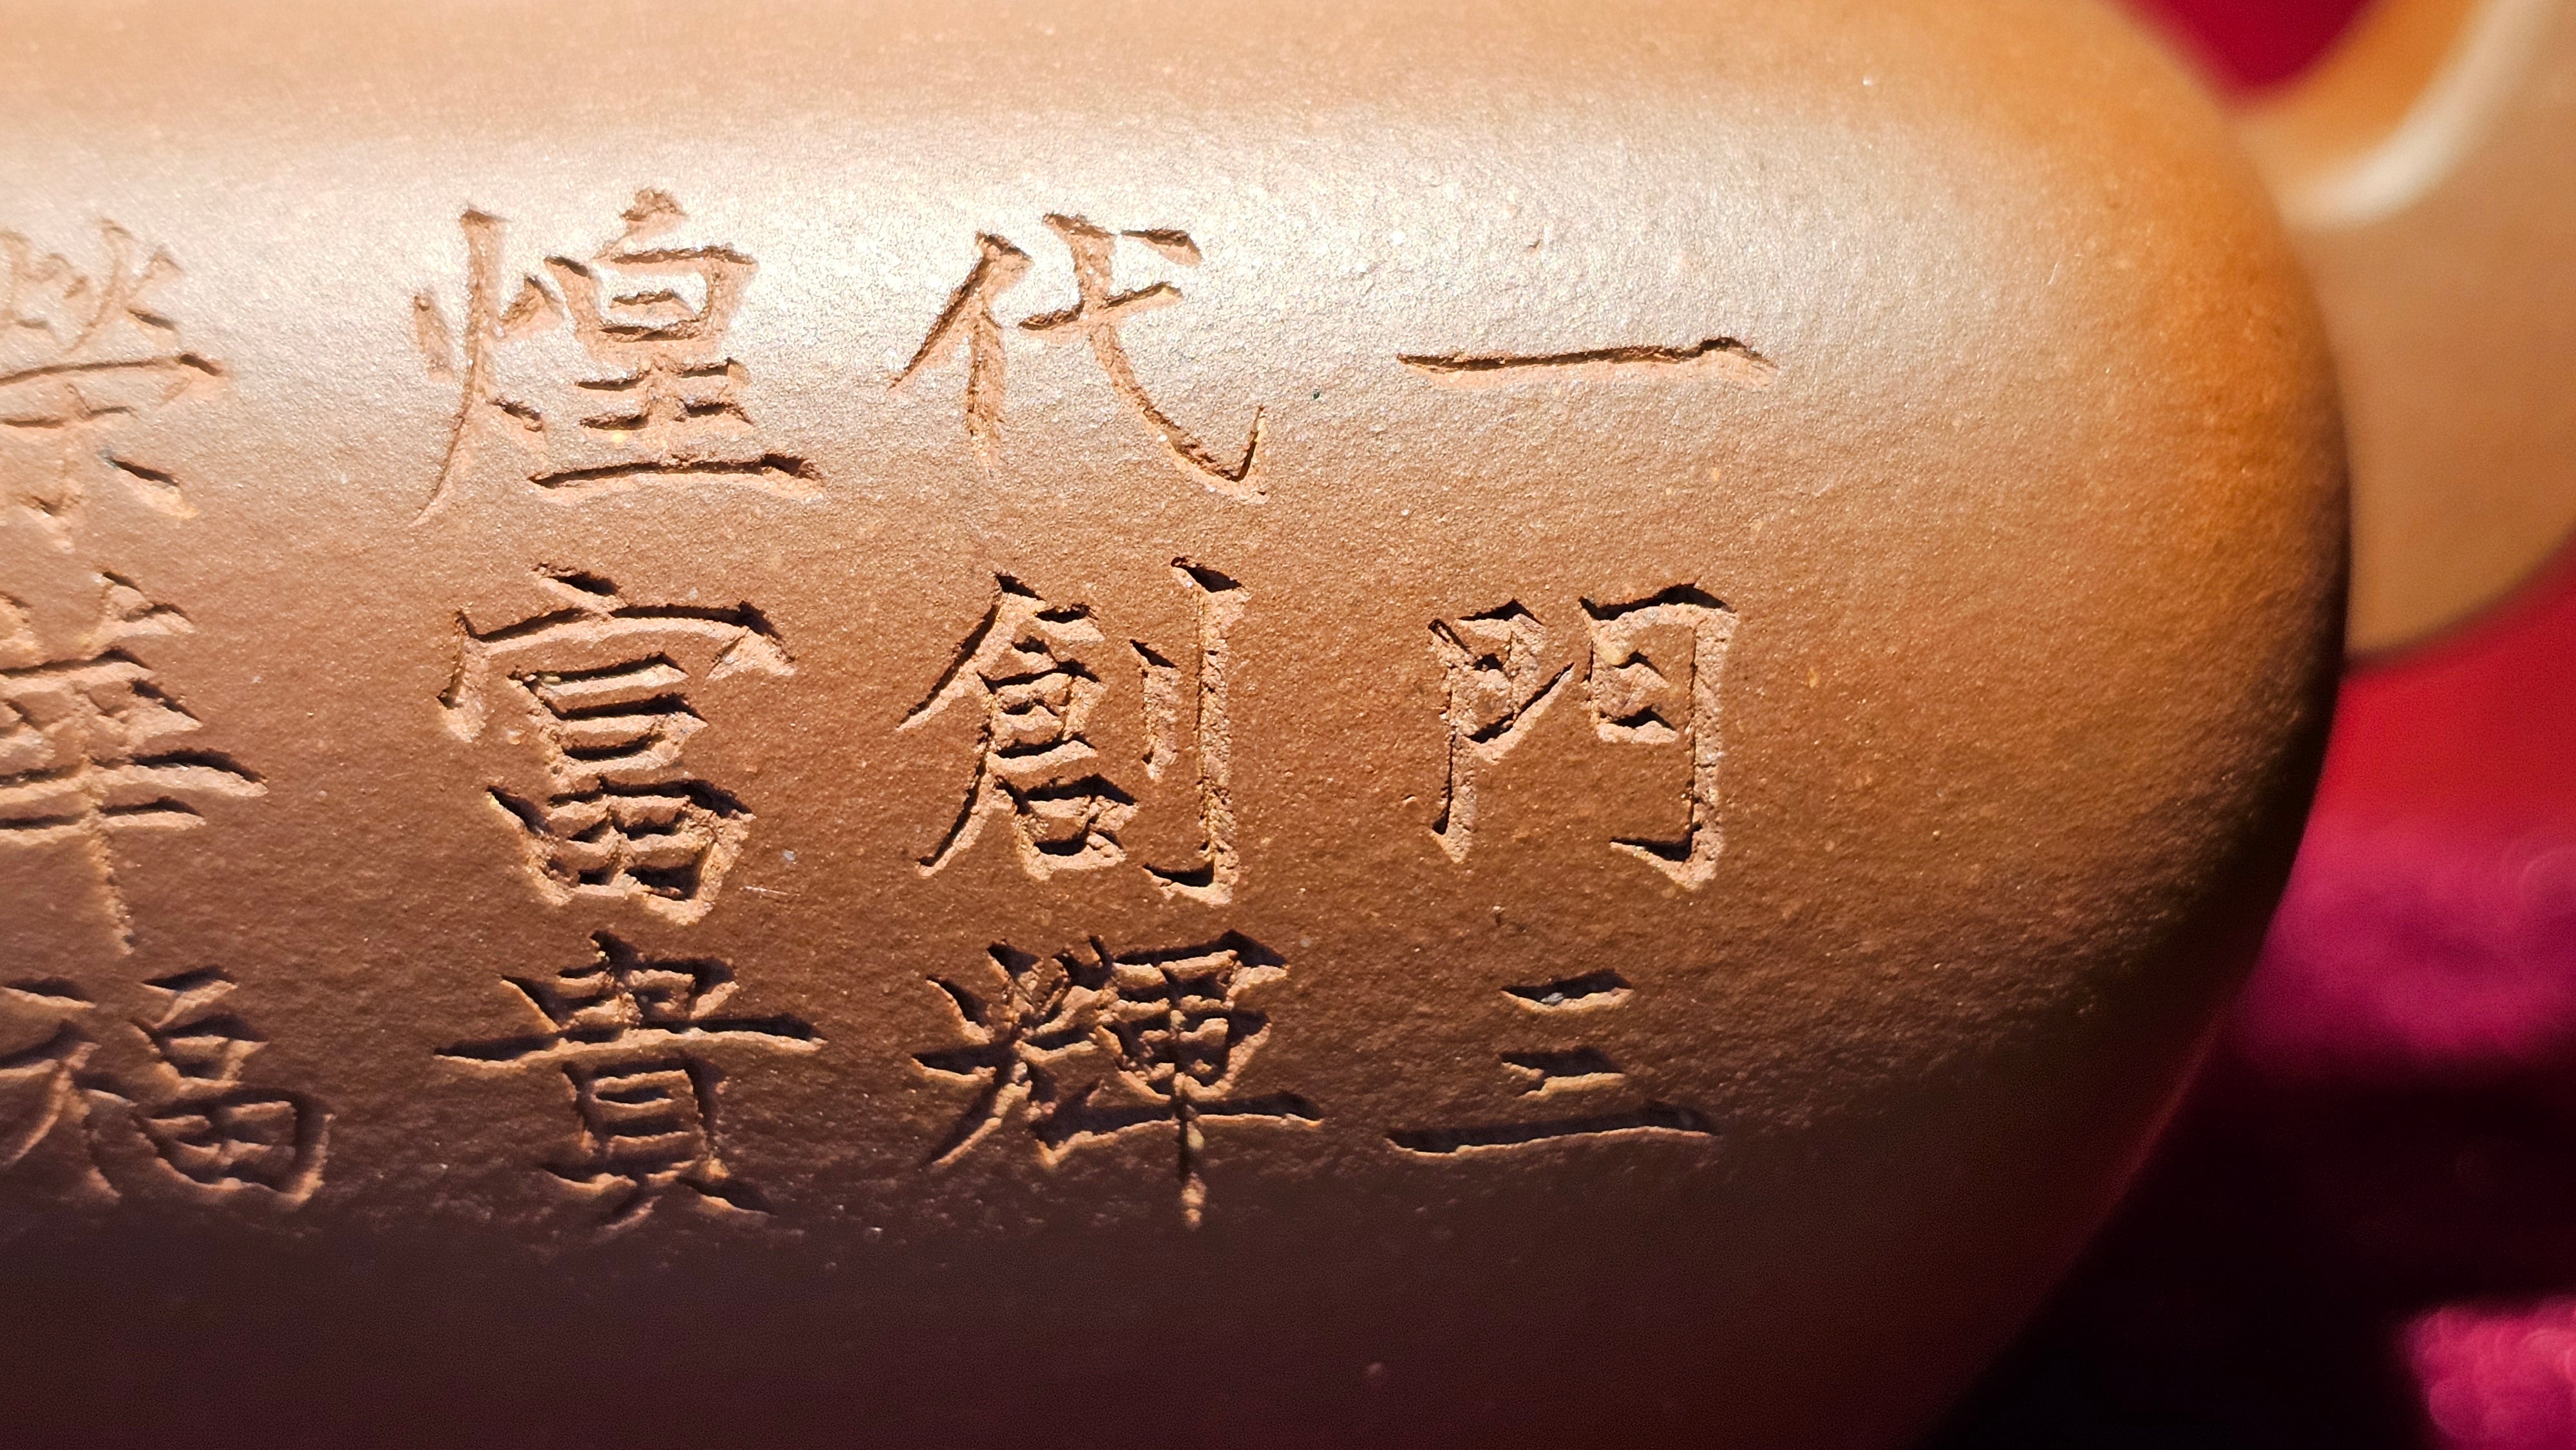 Commissioned by Mr S.Tony:  Fu Shou Chuan Lu 福寿传炉: Huang Long Yuan 4th Quarry DiCaoQing by Assoc Master Yang Quan Sheng +Engraving by Master Wang Chao Peng (with complimentary Couplet!) +Clay Sculpting by Senior Master Shi Chang. ~3rd Frame:video.